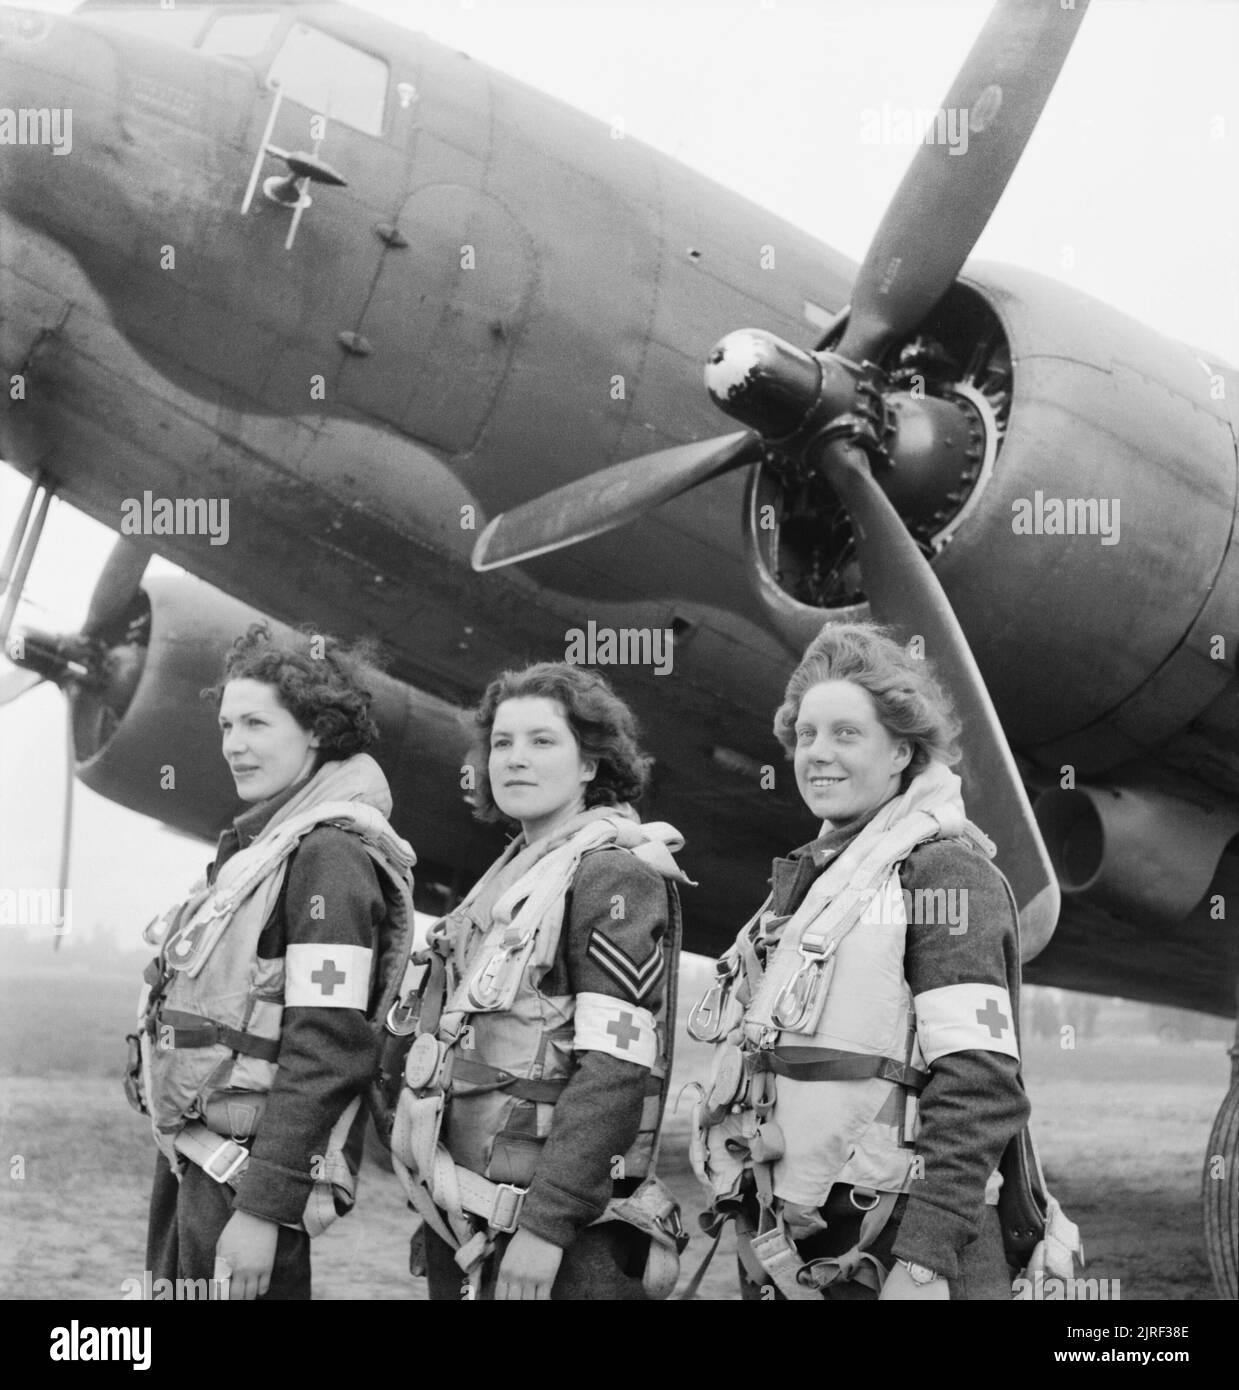 'Royal Air Force Transport Command, 1943-1945. The first WAAF nursing orderlies selected to fly on air-ambulance duties to France, standing in front of a Douglas Dakota Mark III of No. 233 Squadron RAF at B2/Bazenville, Normandy. From left to right: Leading Aircraftwoman Myra Roberts of Oswestry, Corporal Lydia Alford of Eastleigh and Leading Aircraftwoman Edna Birbeck of Wellingborough'. Stock Photo